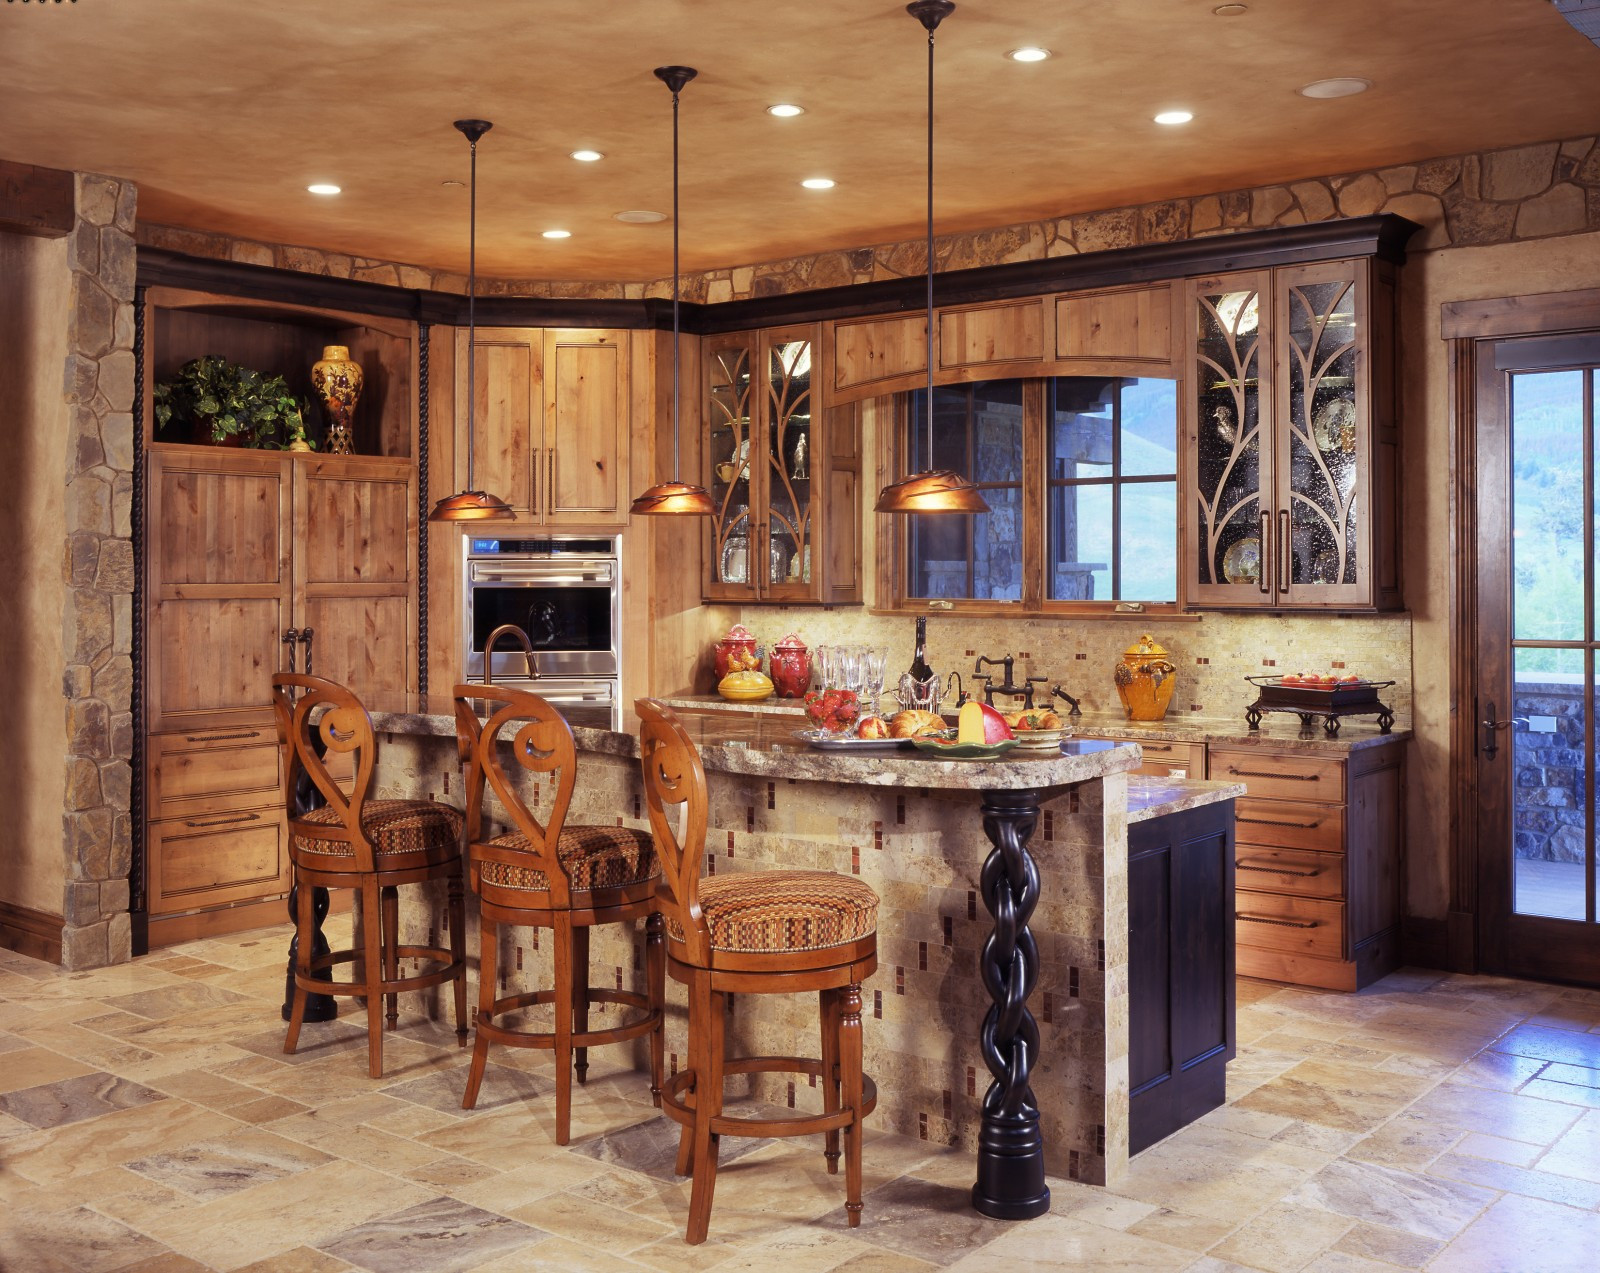 Rustic Kitchen Designs Photo Gallery
 Top 25 Ideas to Spruce up the Kitchen Decor in 2014 Qnud